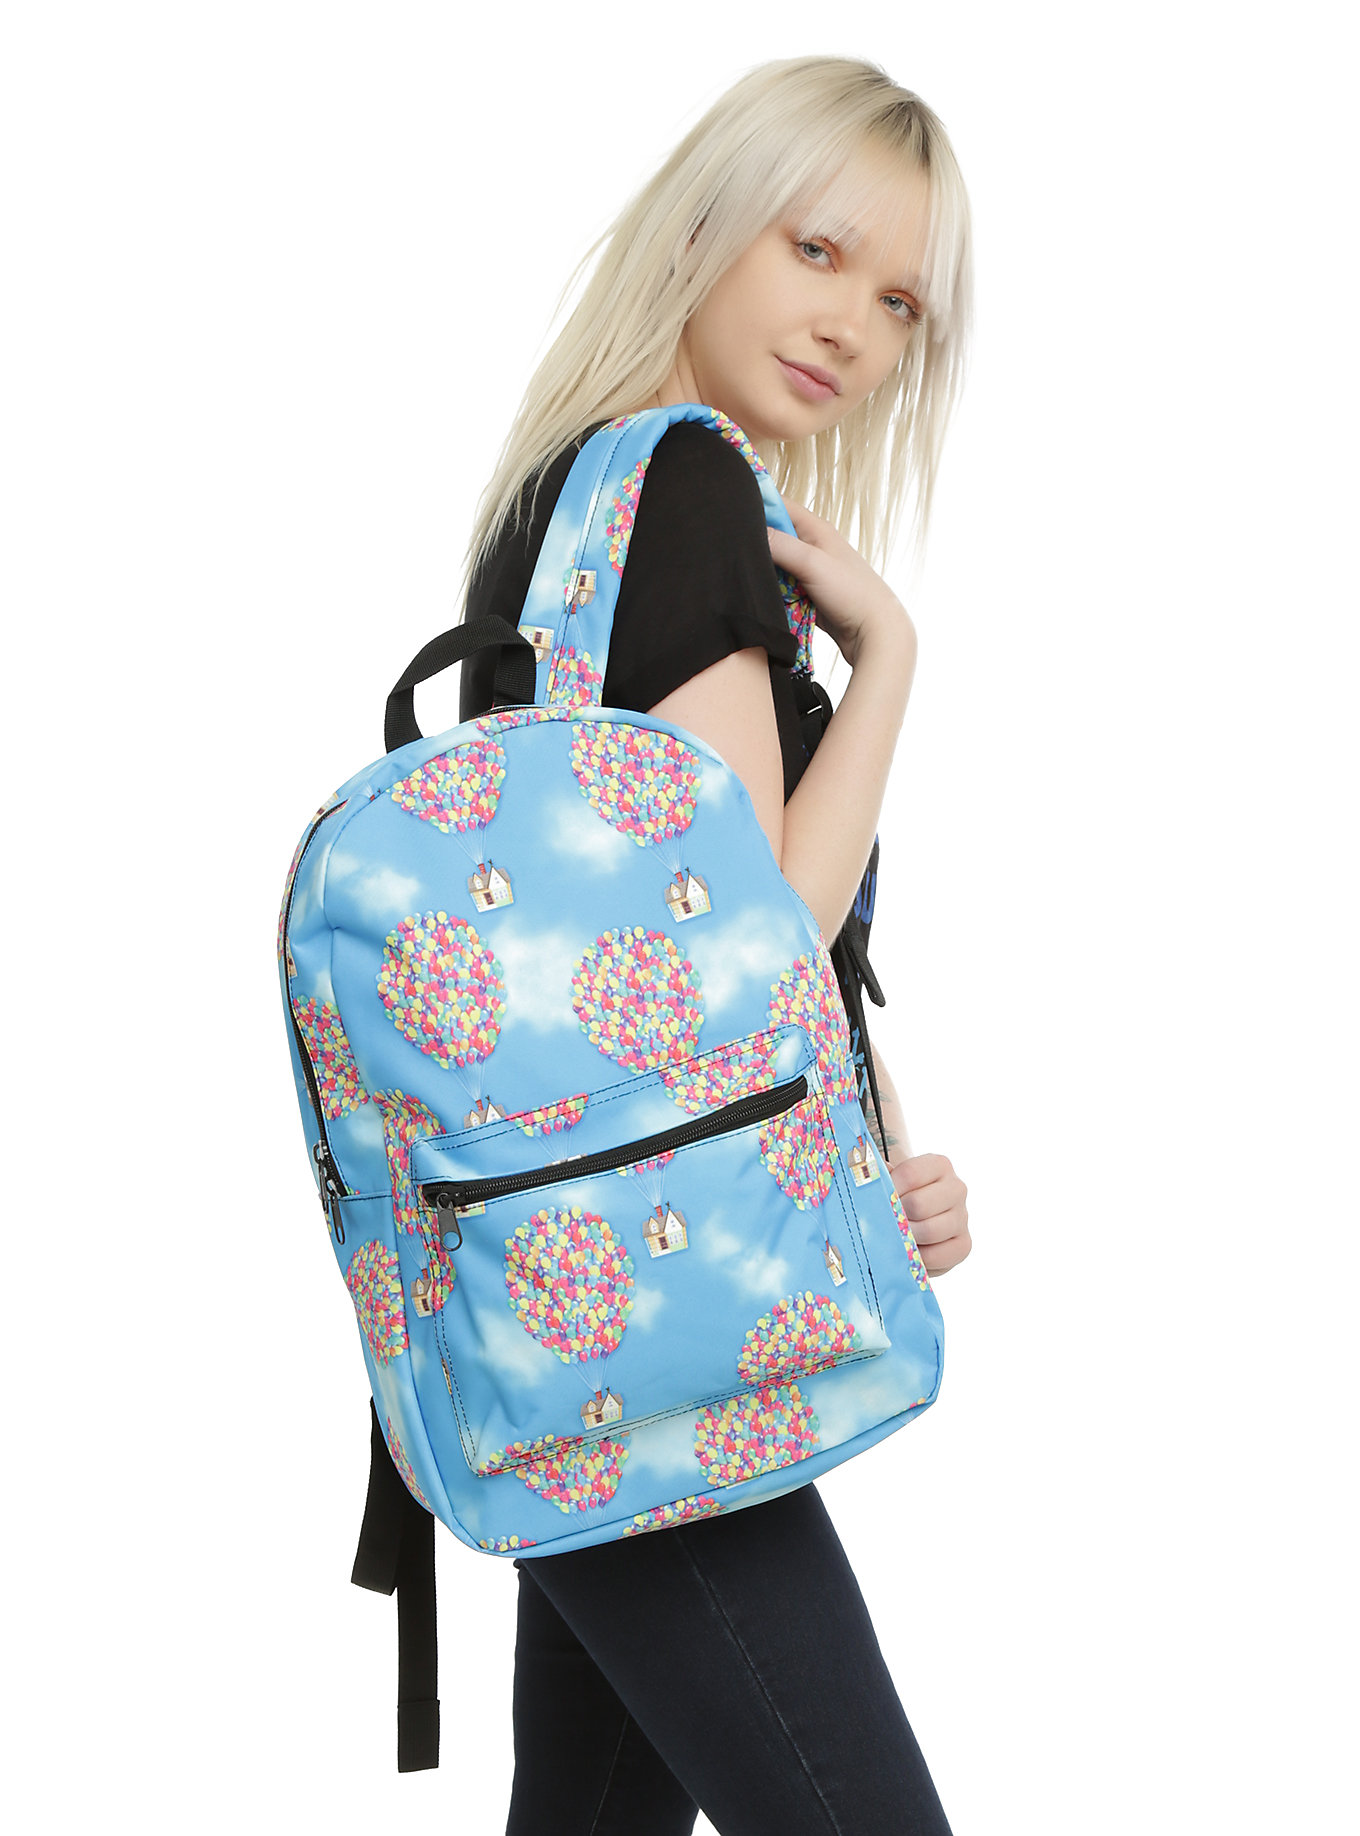 Disney Backpacks On Sale at Hot Topic